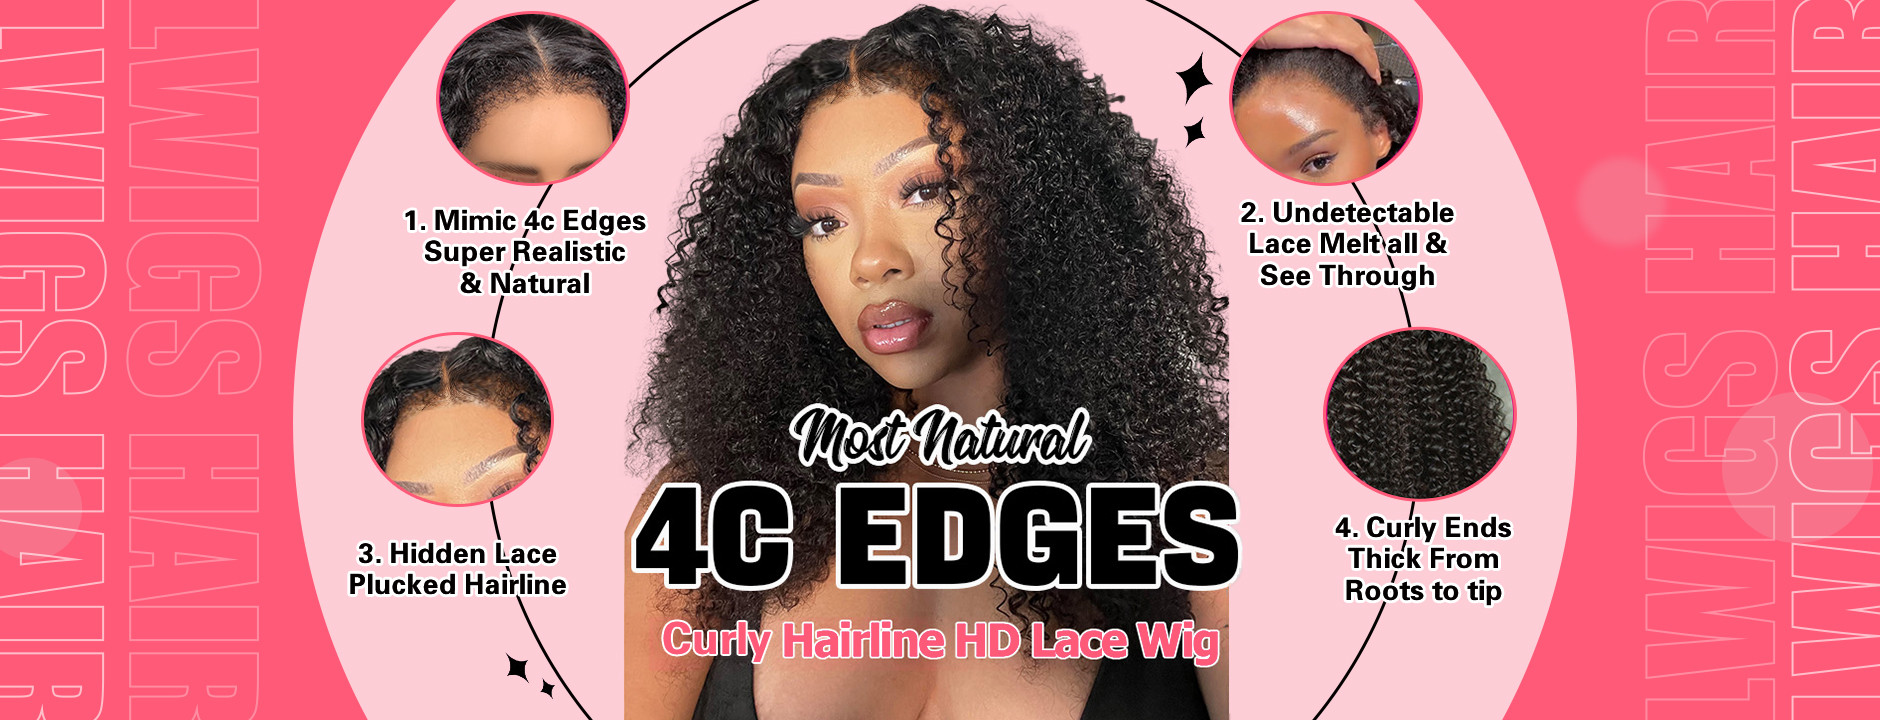 HD lace,lace melt, swiss lace, clean hairline, pre-plucked, bleached knots